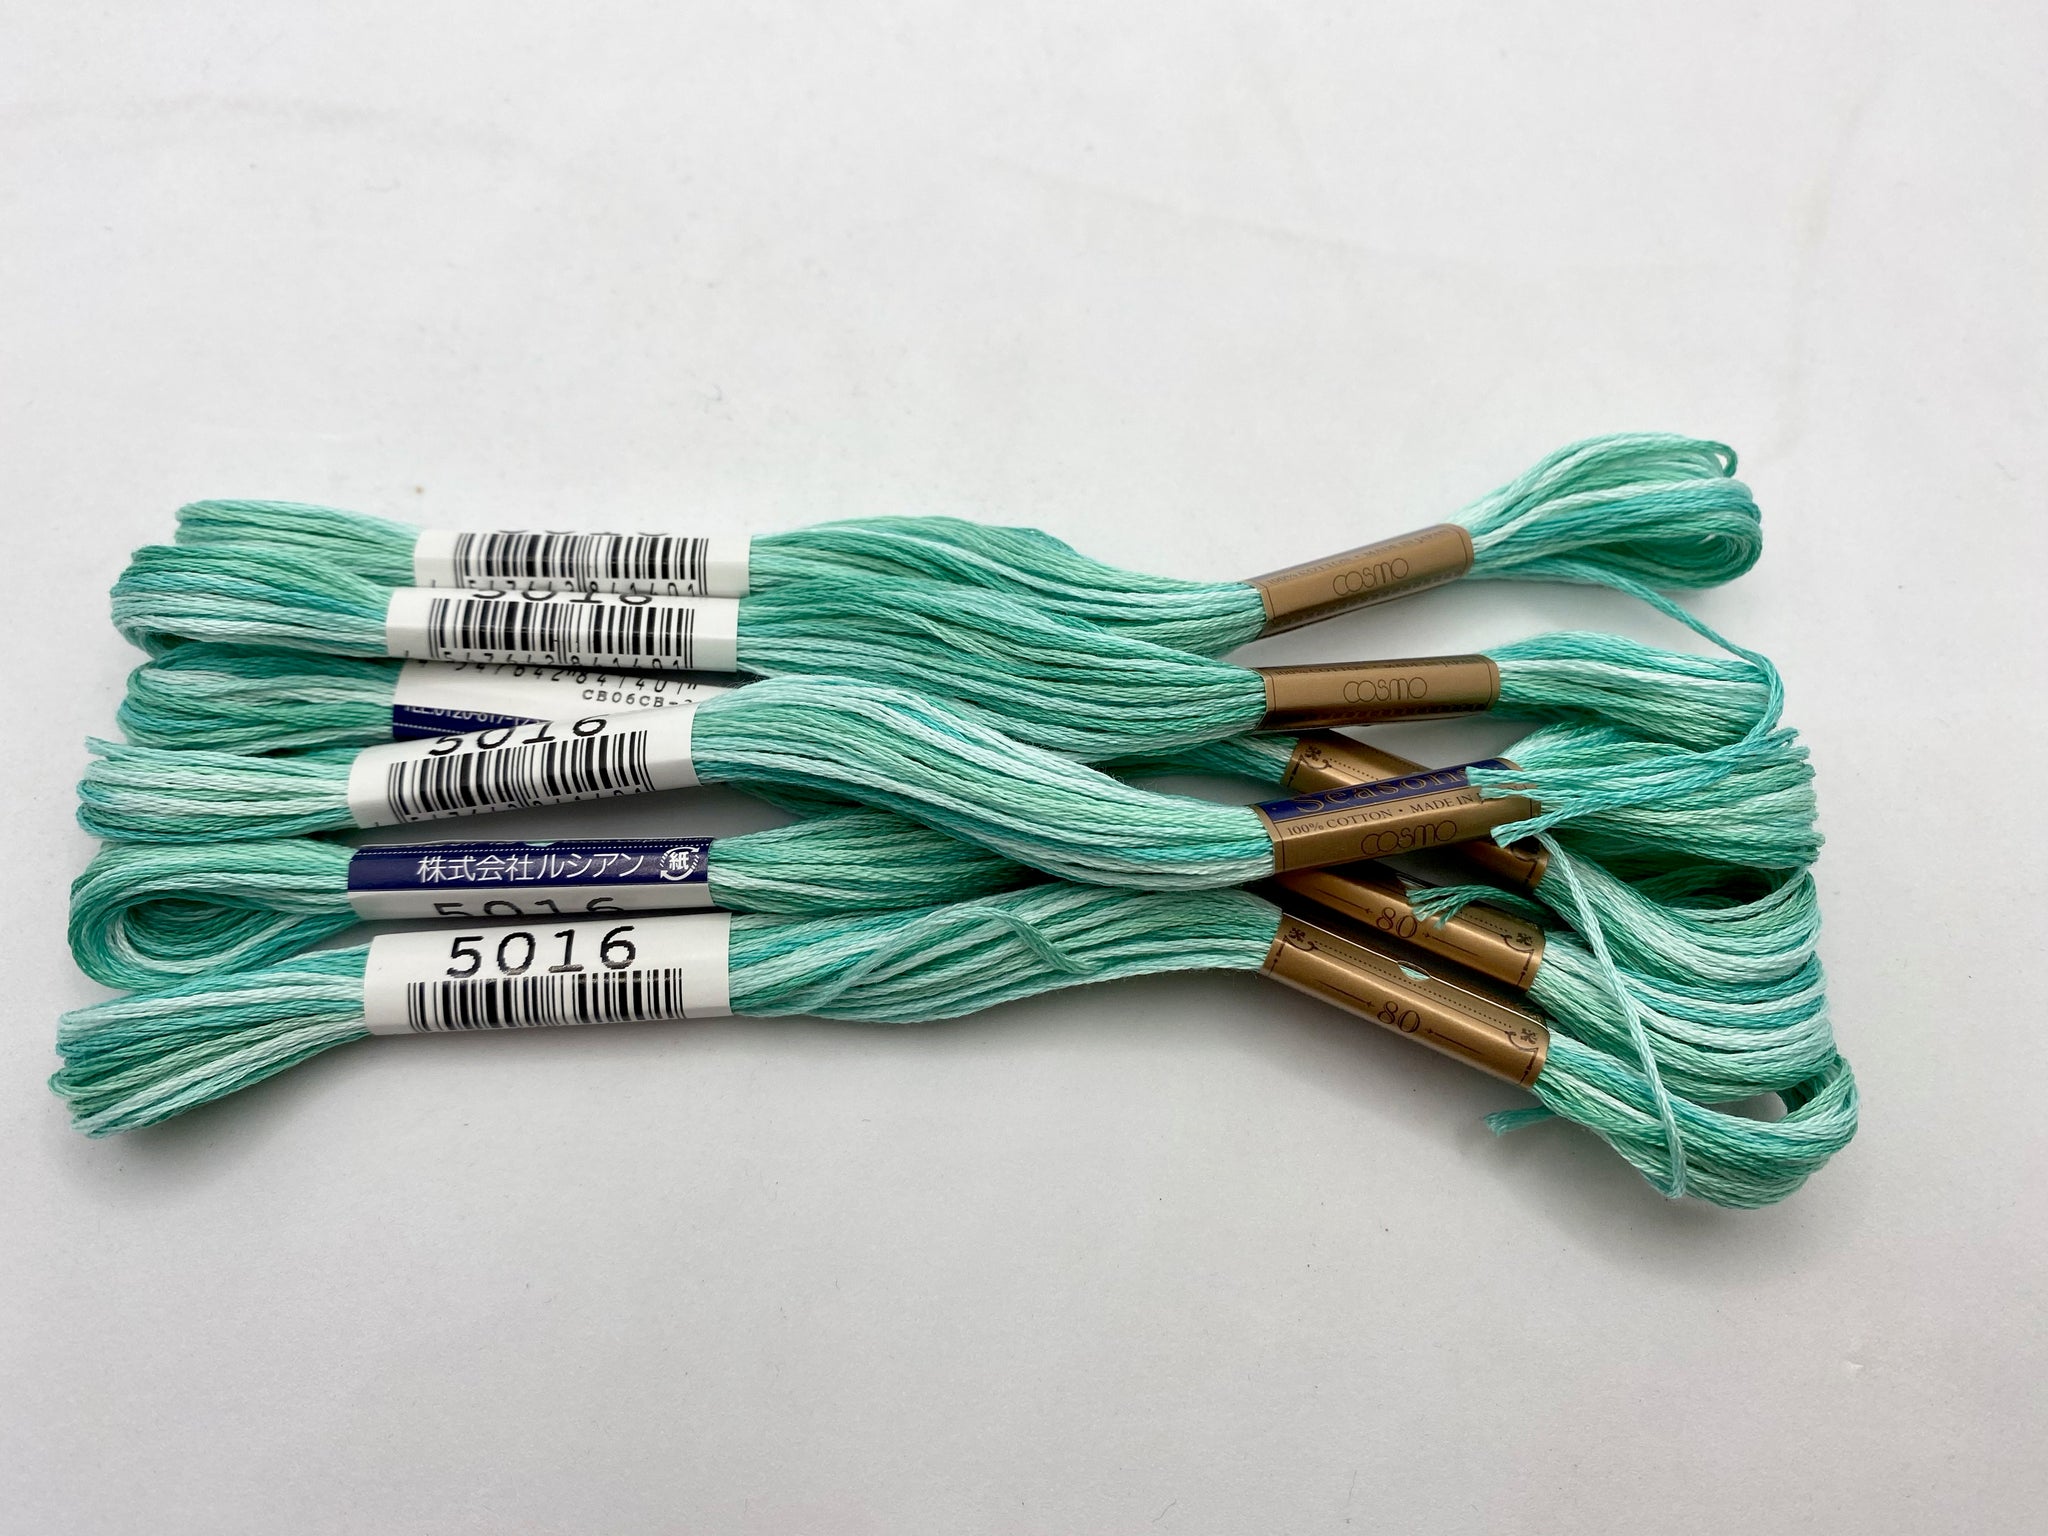 Hand Embroidery Floss - Cosmo Seasons Variegated #5005